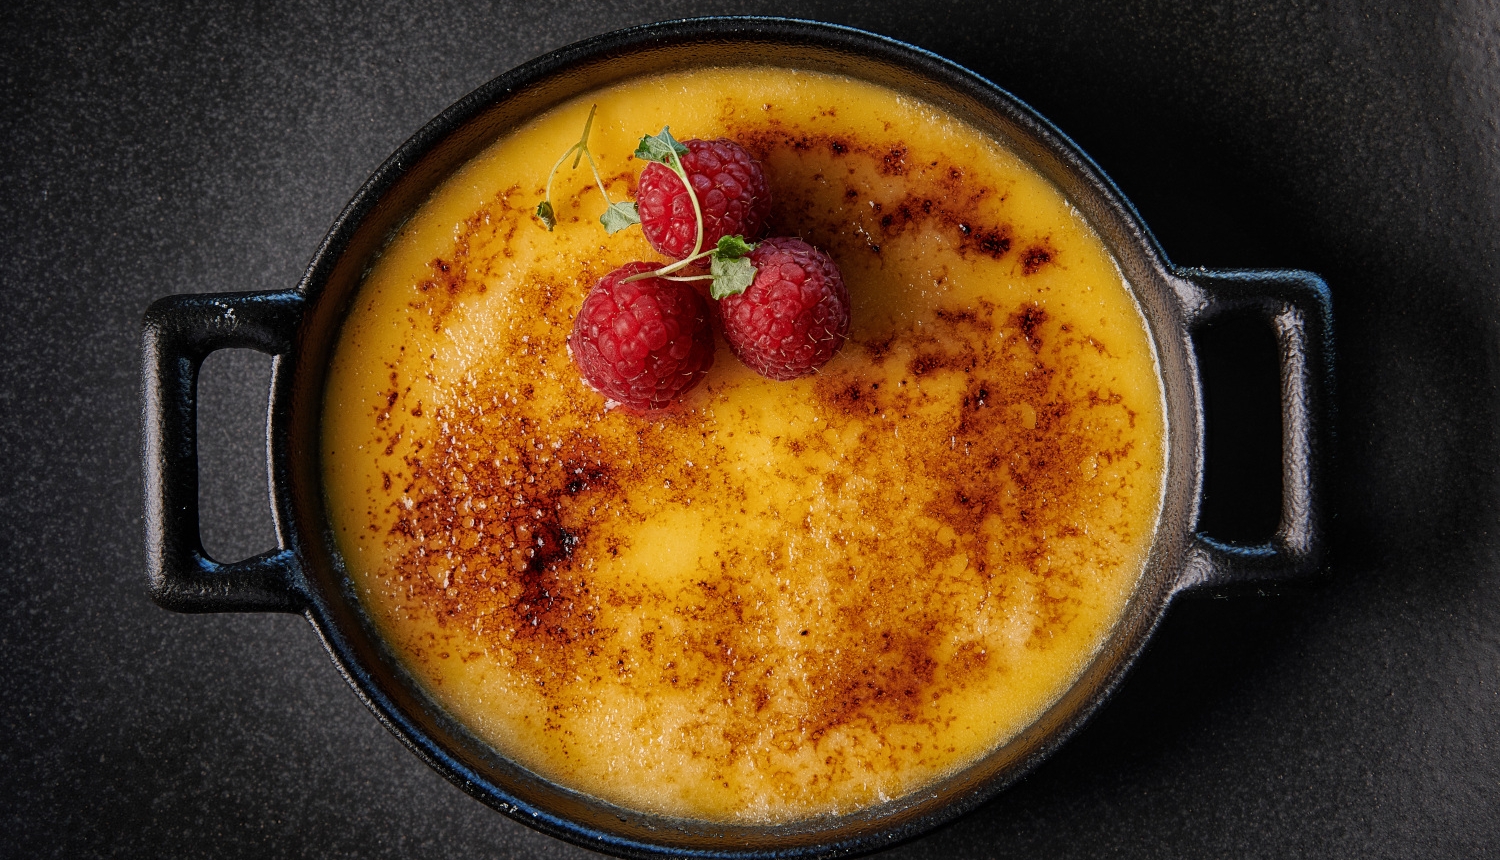 A creme brulée dessert topped with raspberries